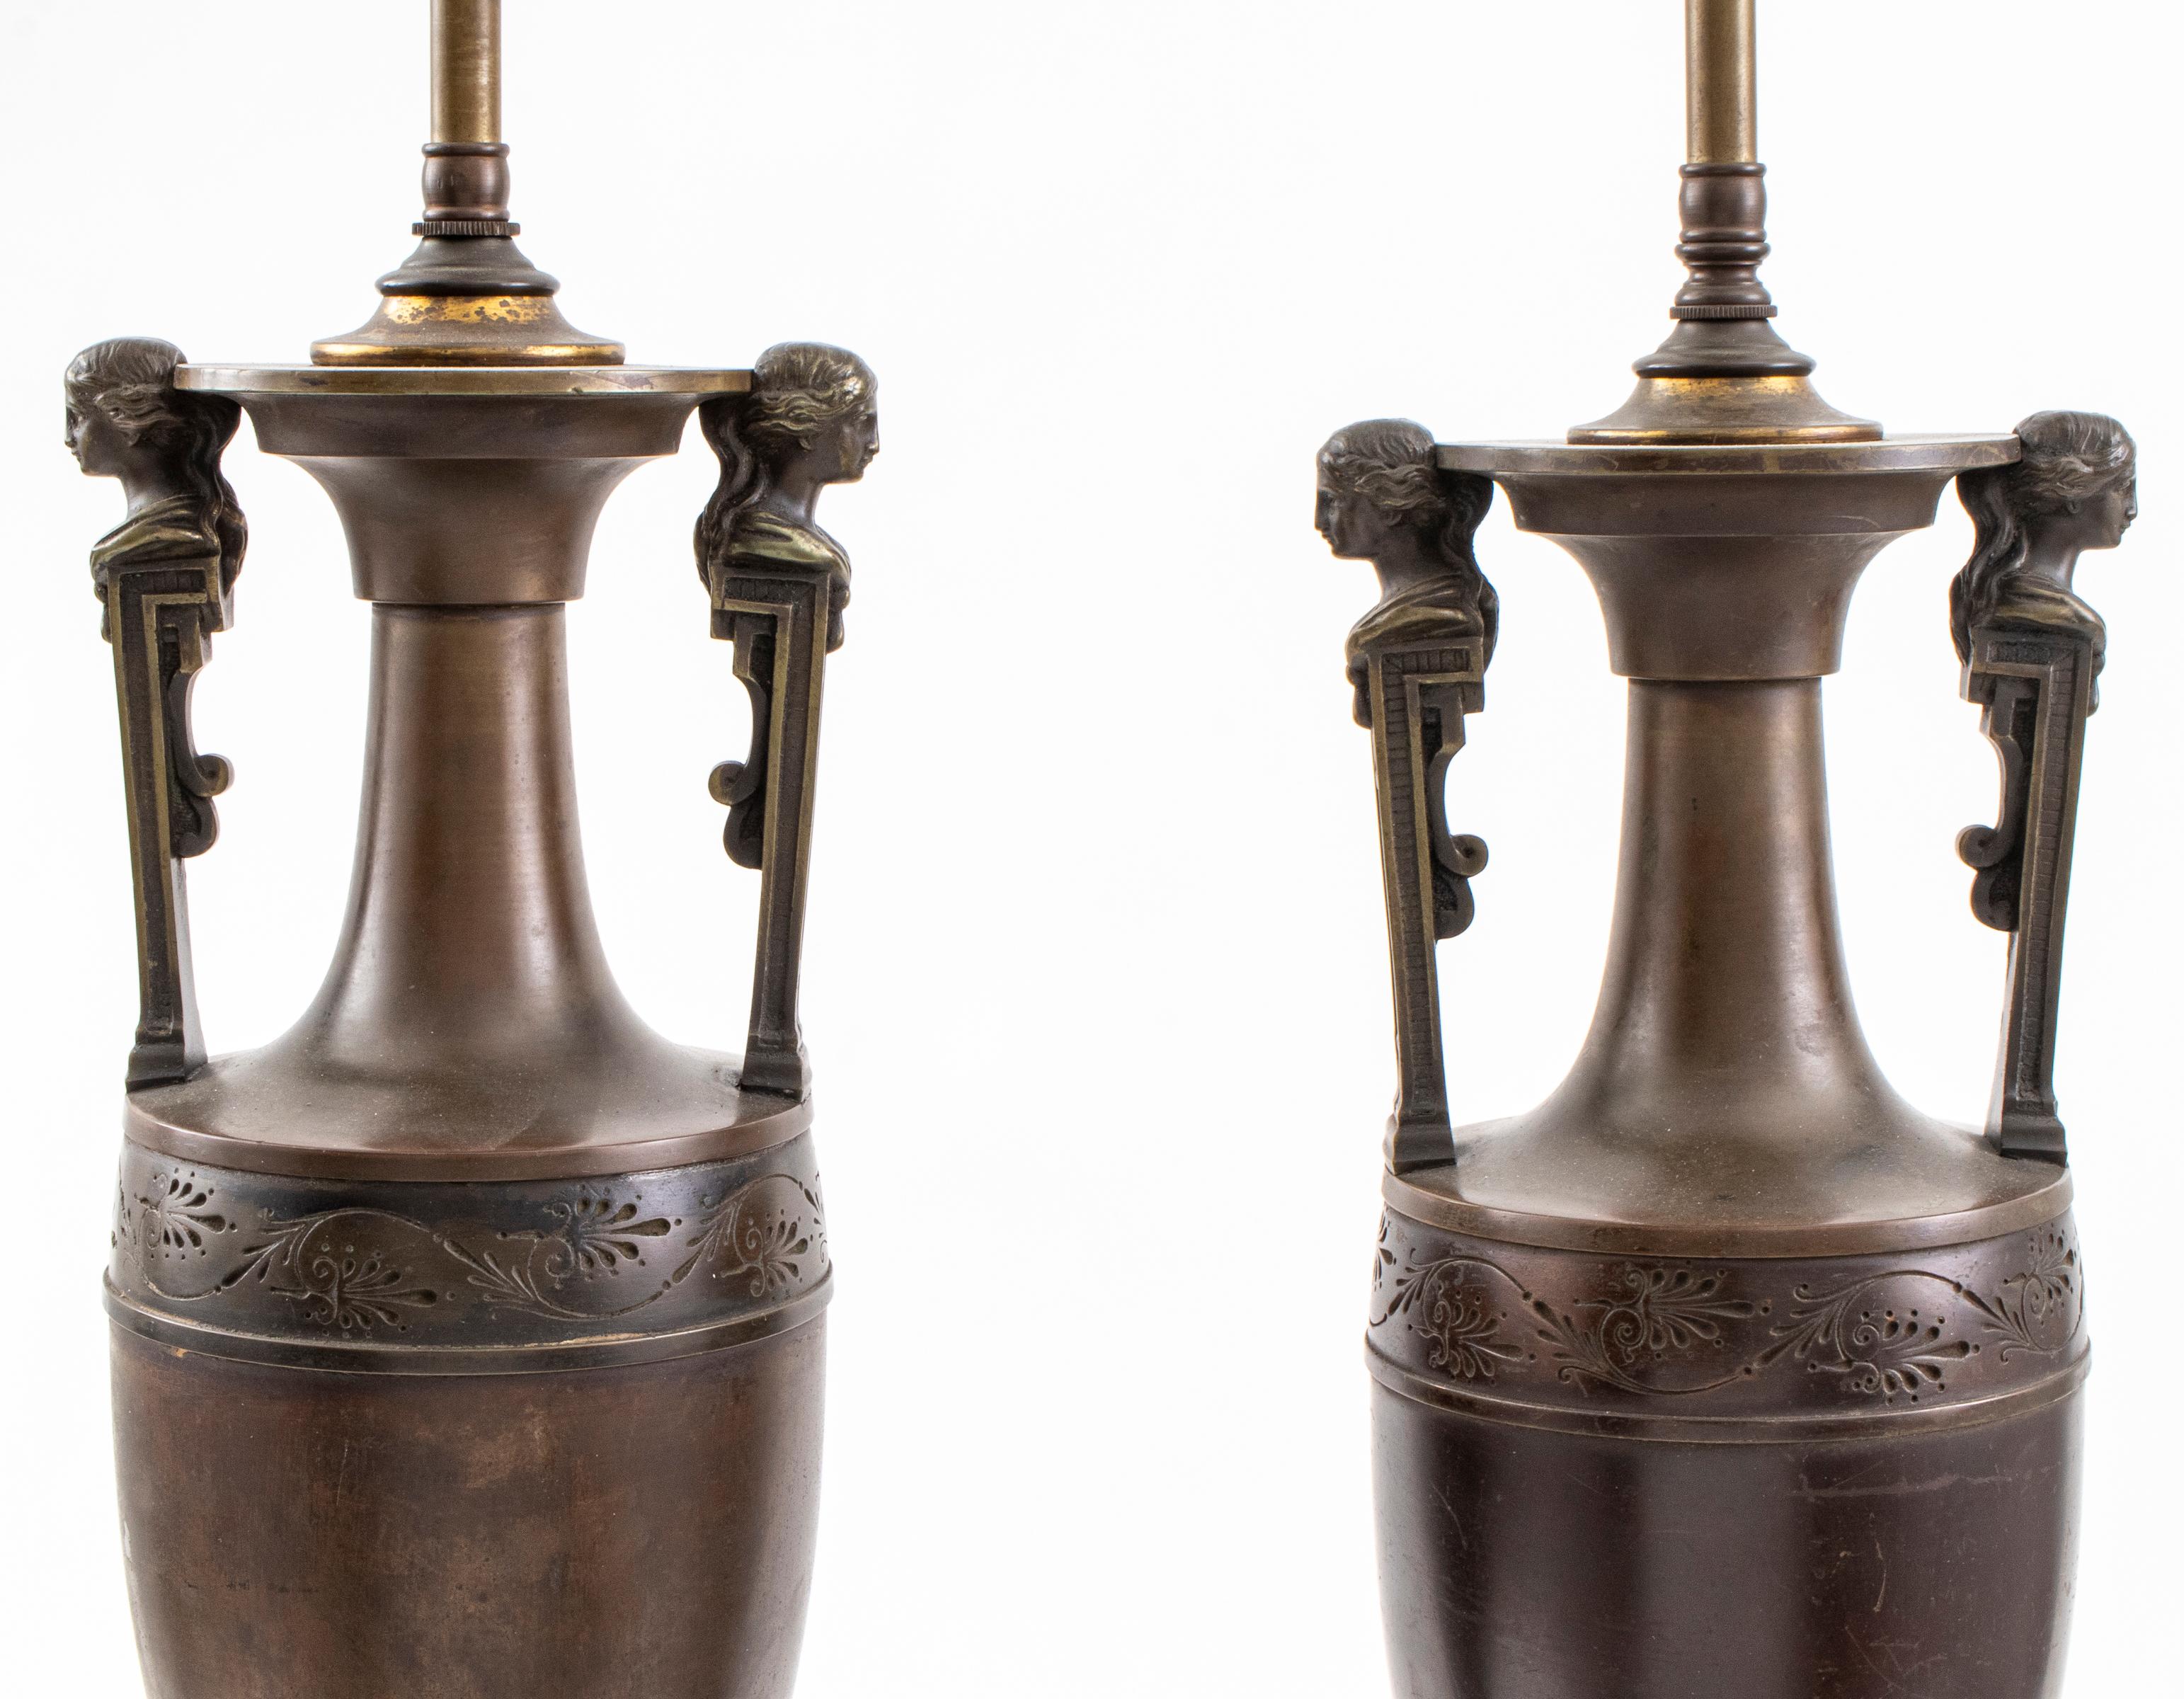 Pair of Grand Tour Etruscan Revival bronze table lamps, featuring two lights over amphora form vase, the handles modeled as female figureheads, over shaped palmette feet and mounted to associated wood base. Overall: 34.75